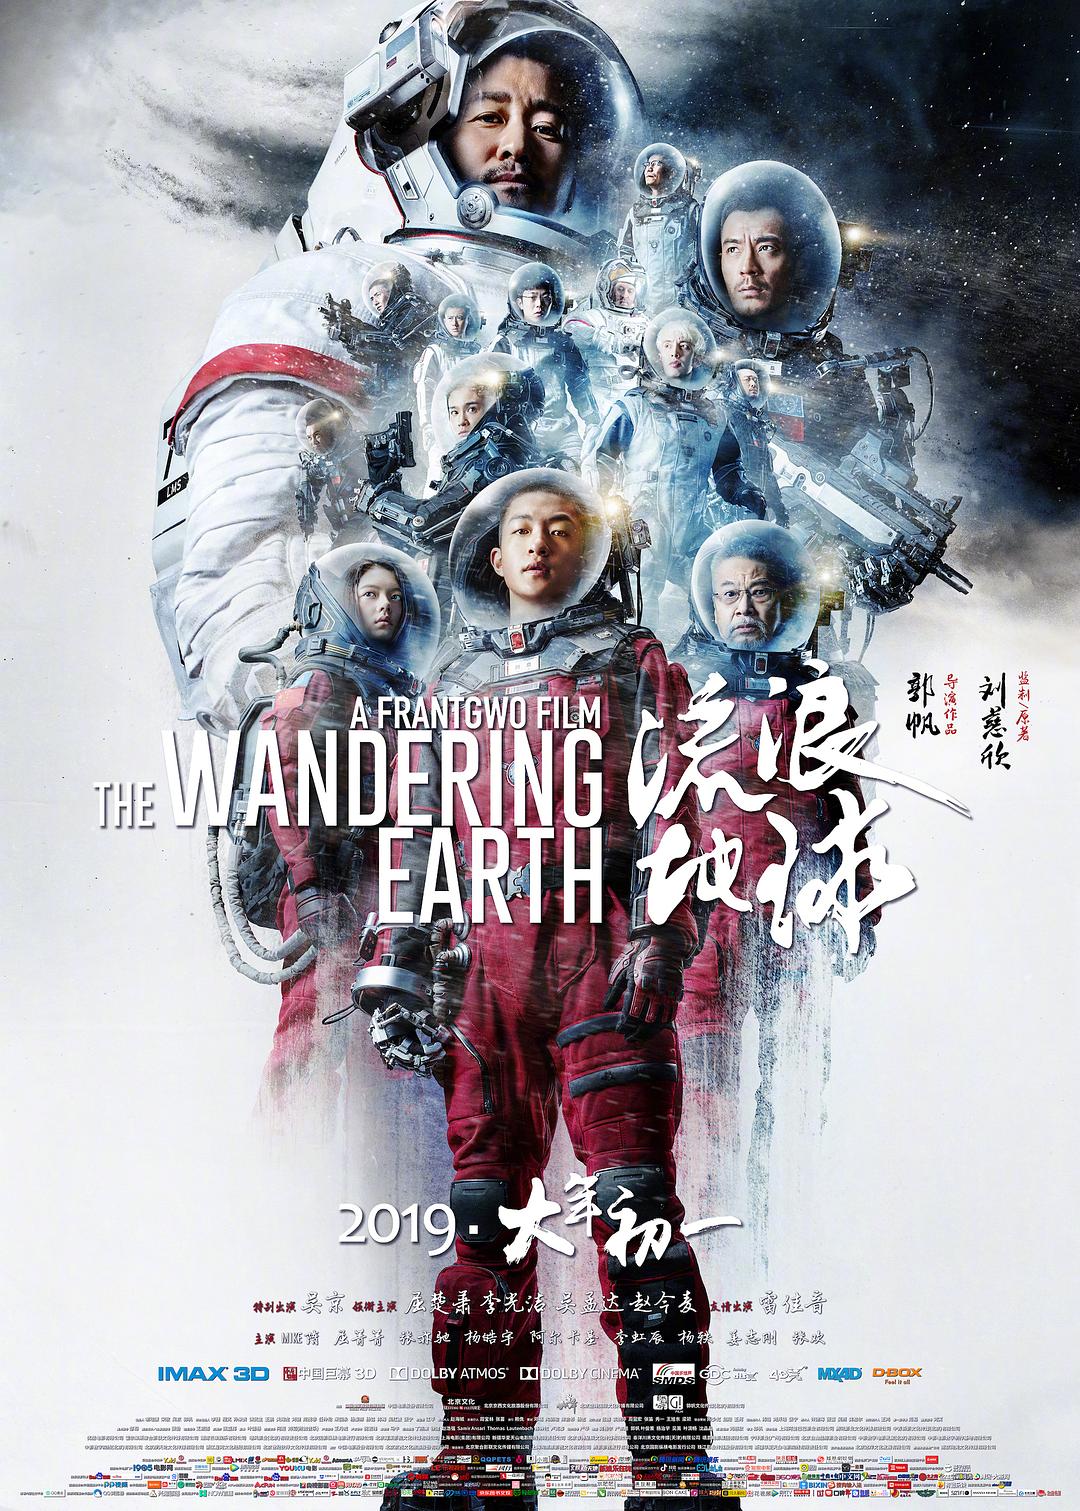 ˵ The.Wandering.Earth.2019.CHINESE.1080p.BluRay.REMUX.AVC.DTS-HD.MA.TrueHD.7.-1.png